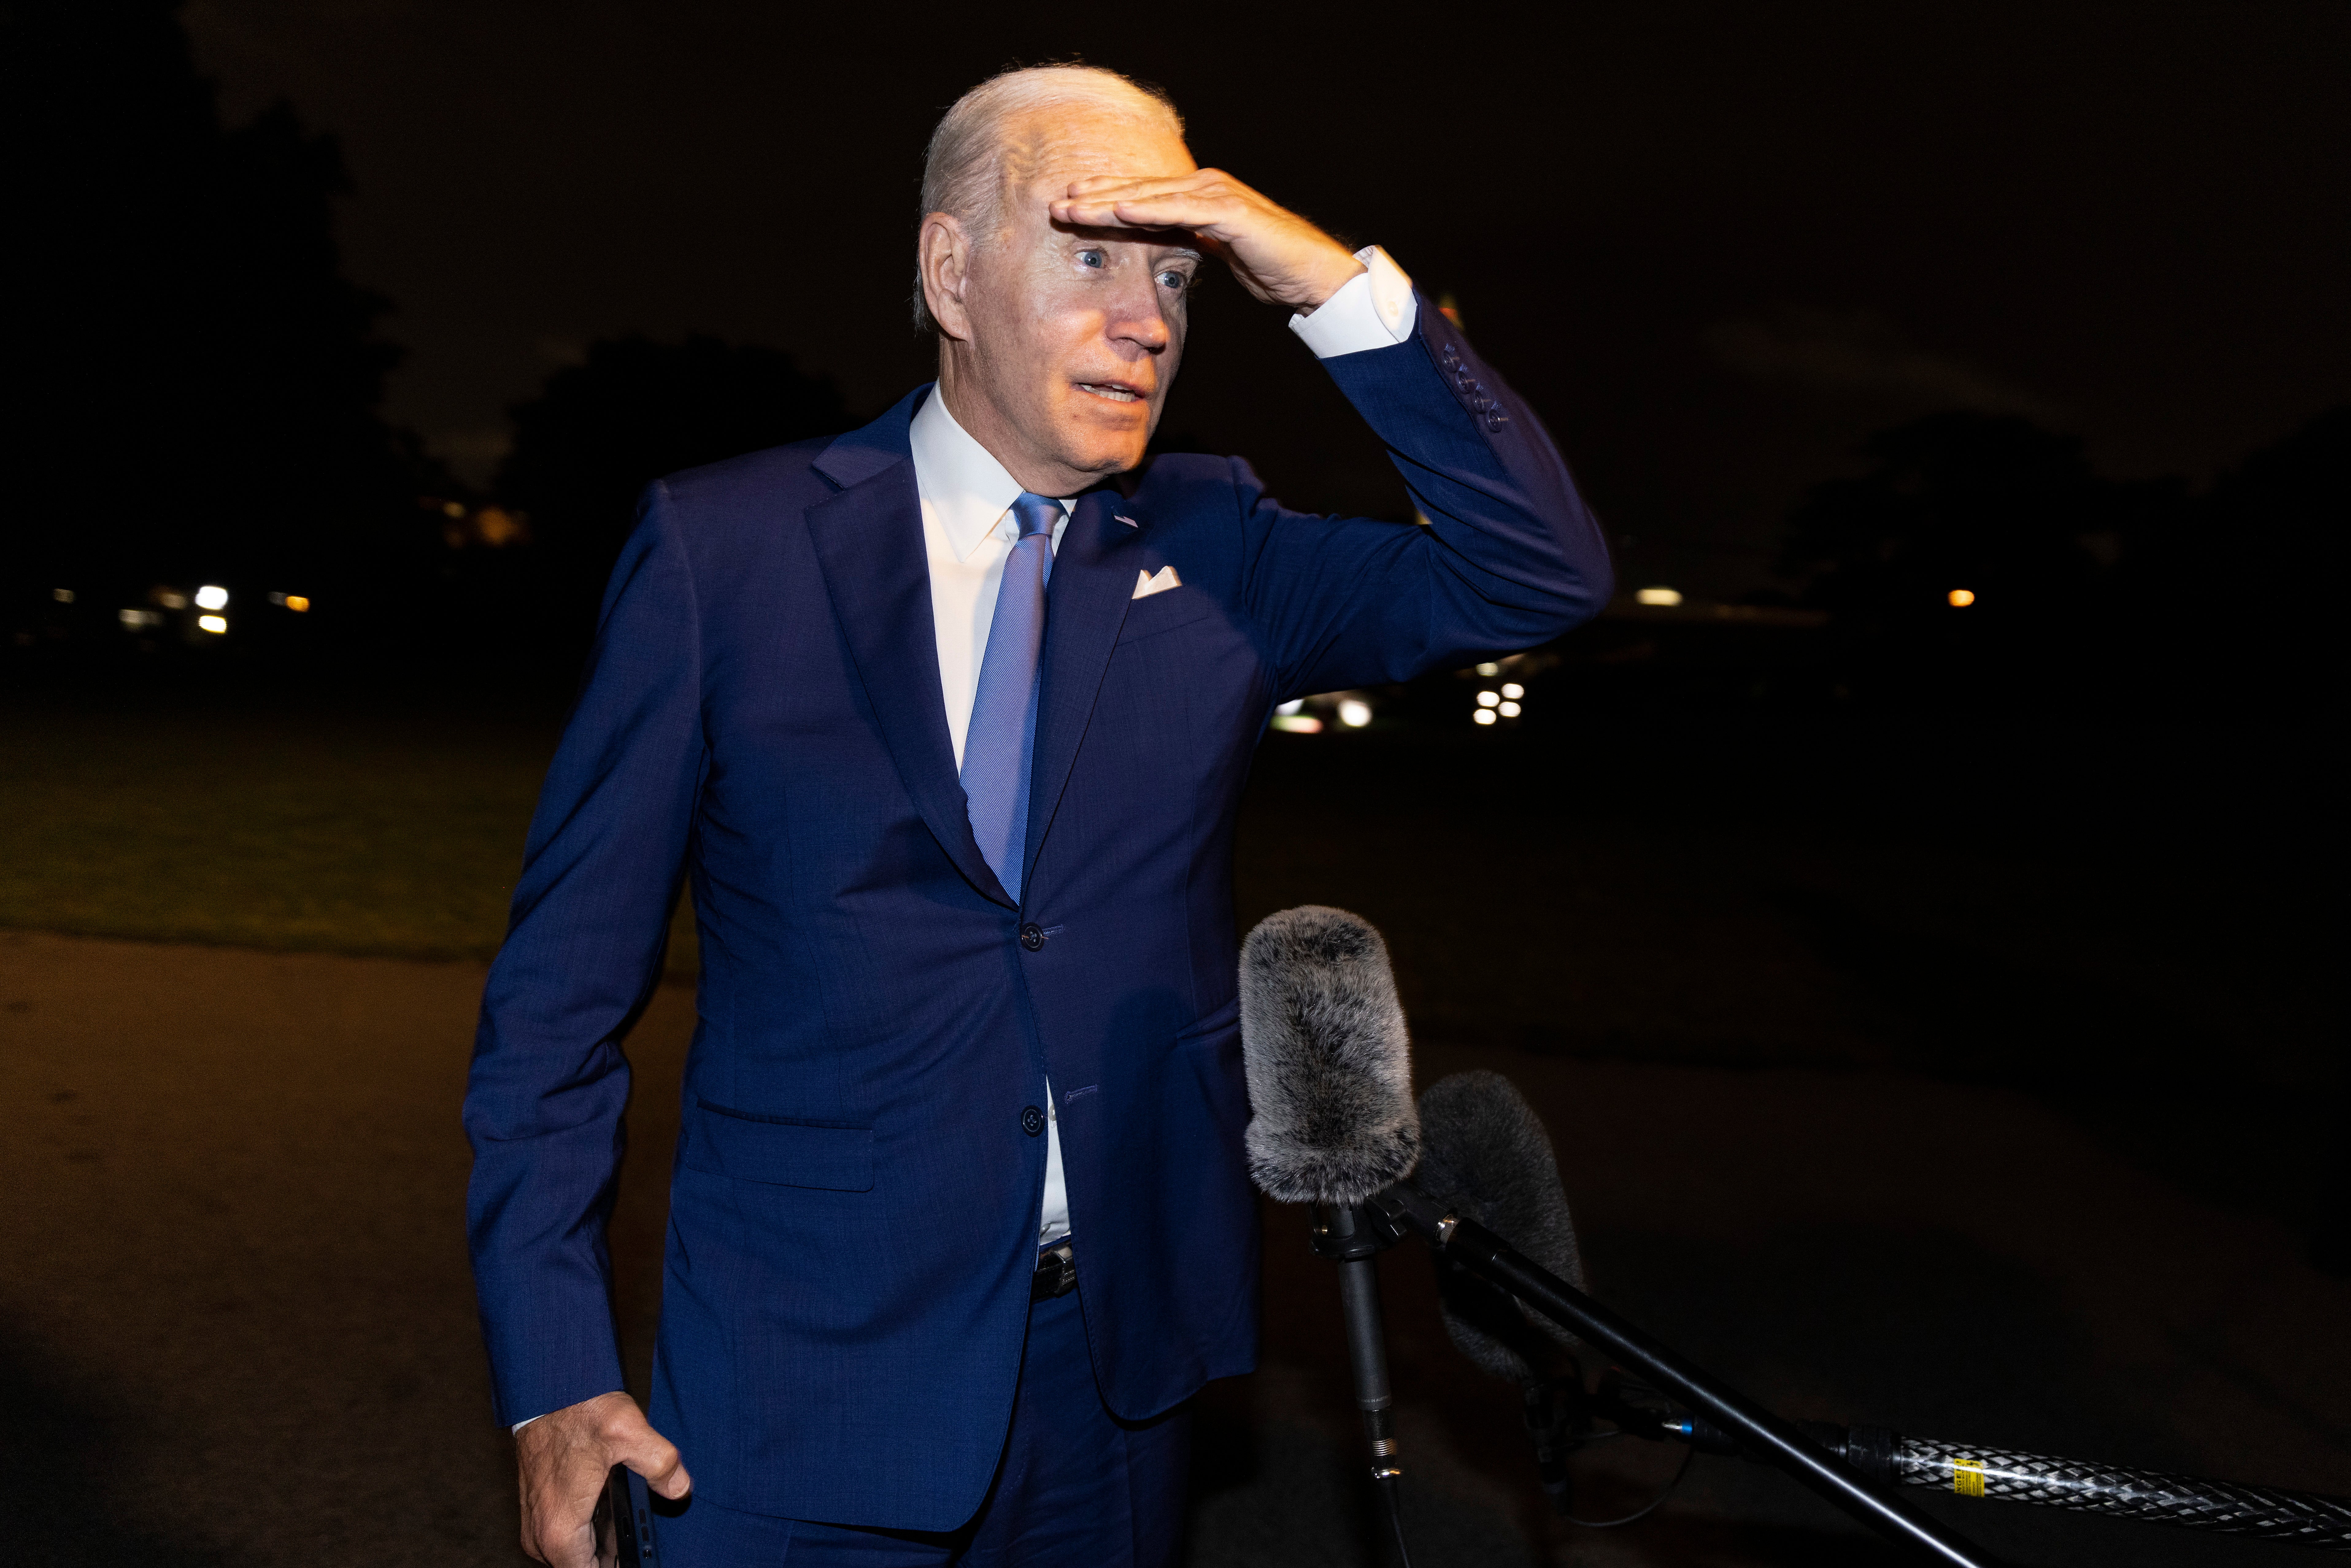 President Biden disputes comments made by Saudi officials as he lands back at the White House on Saturday night